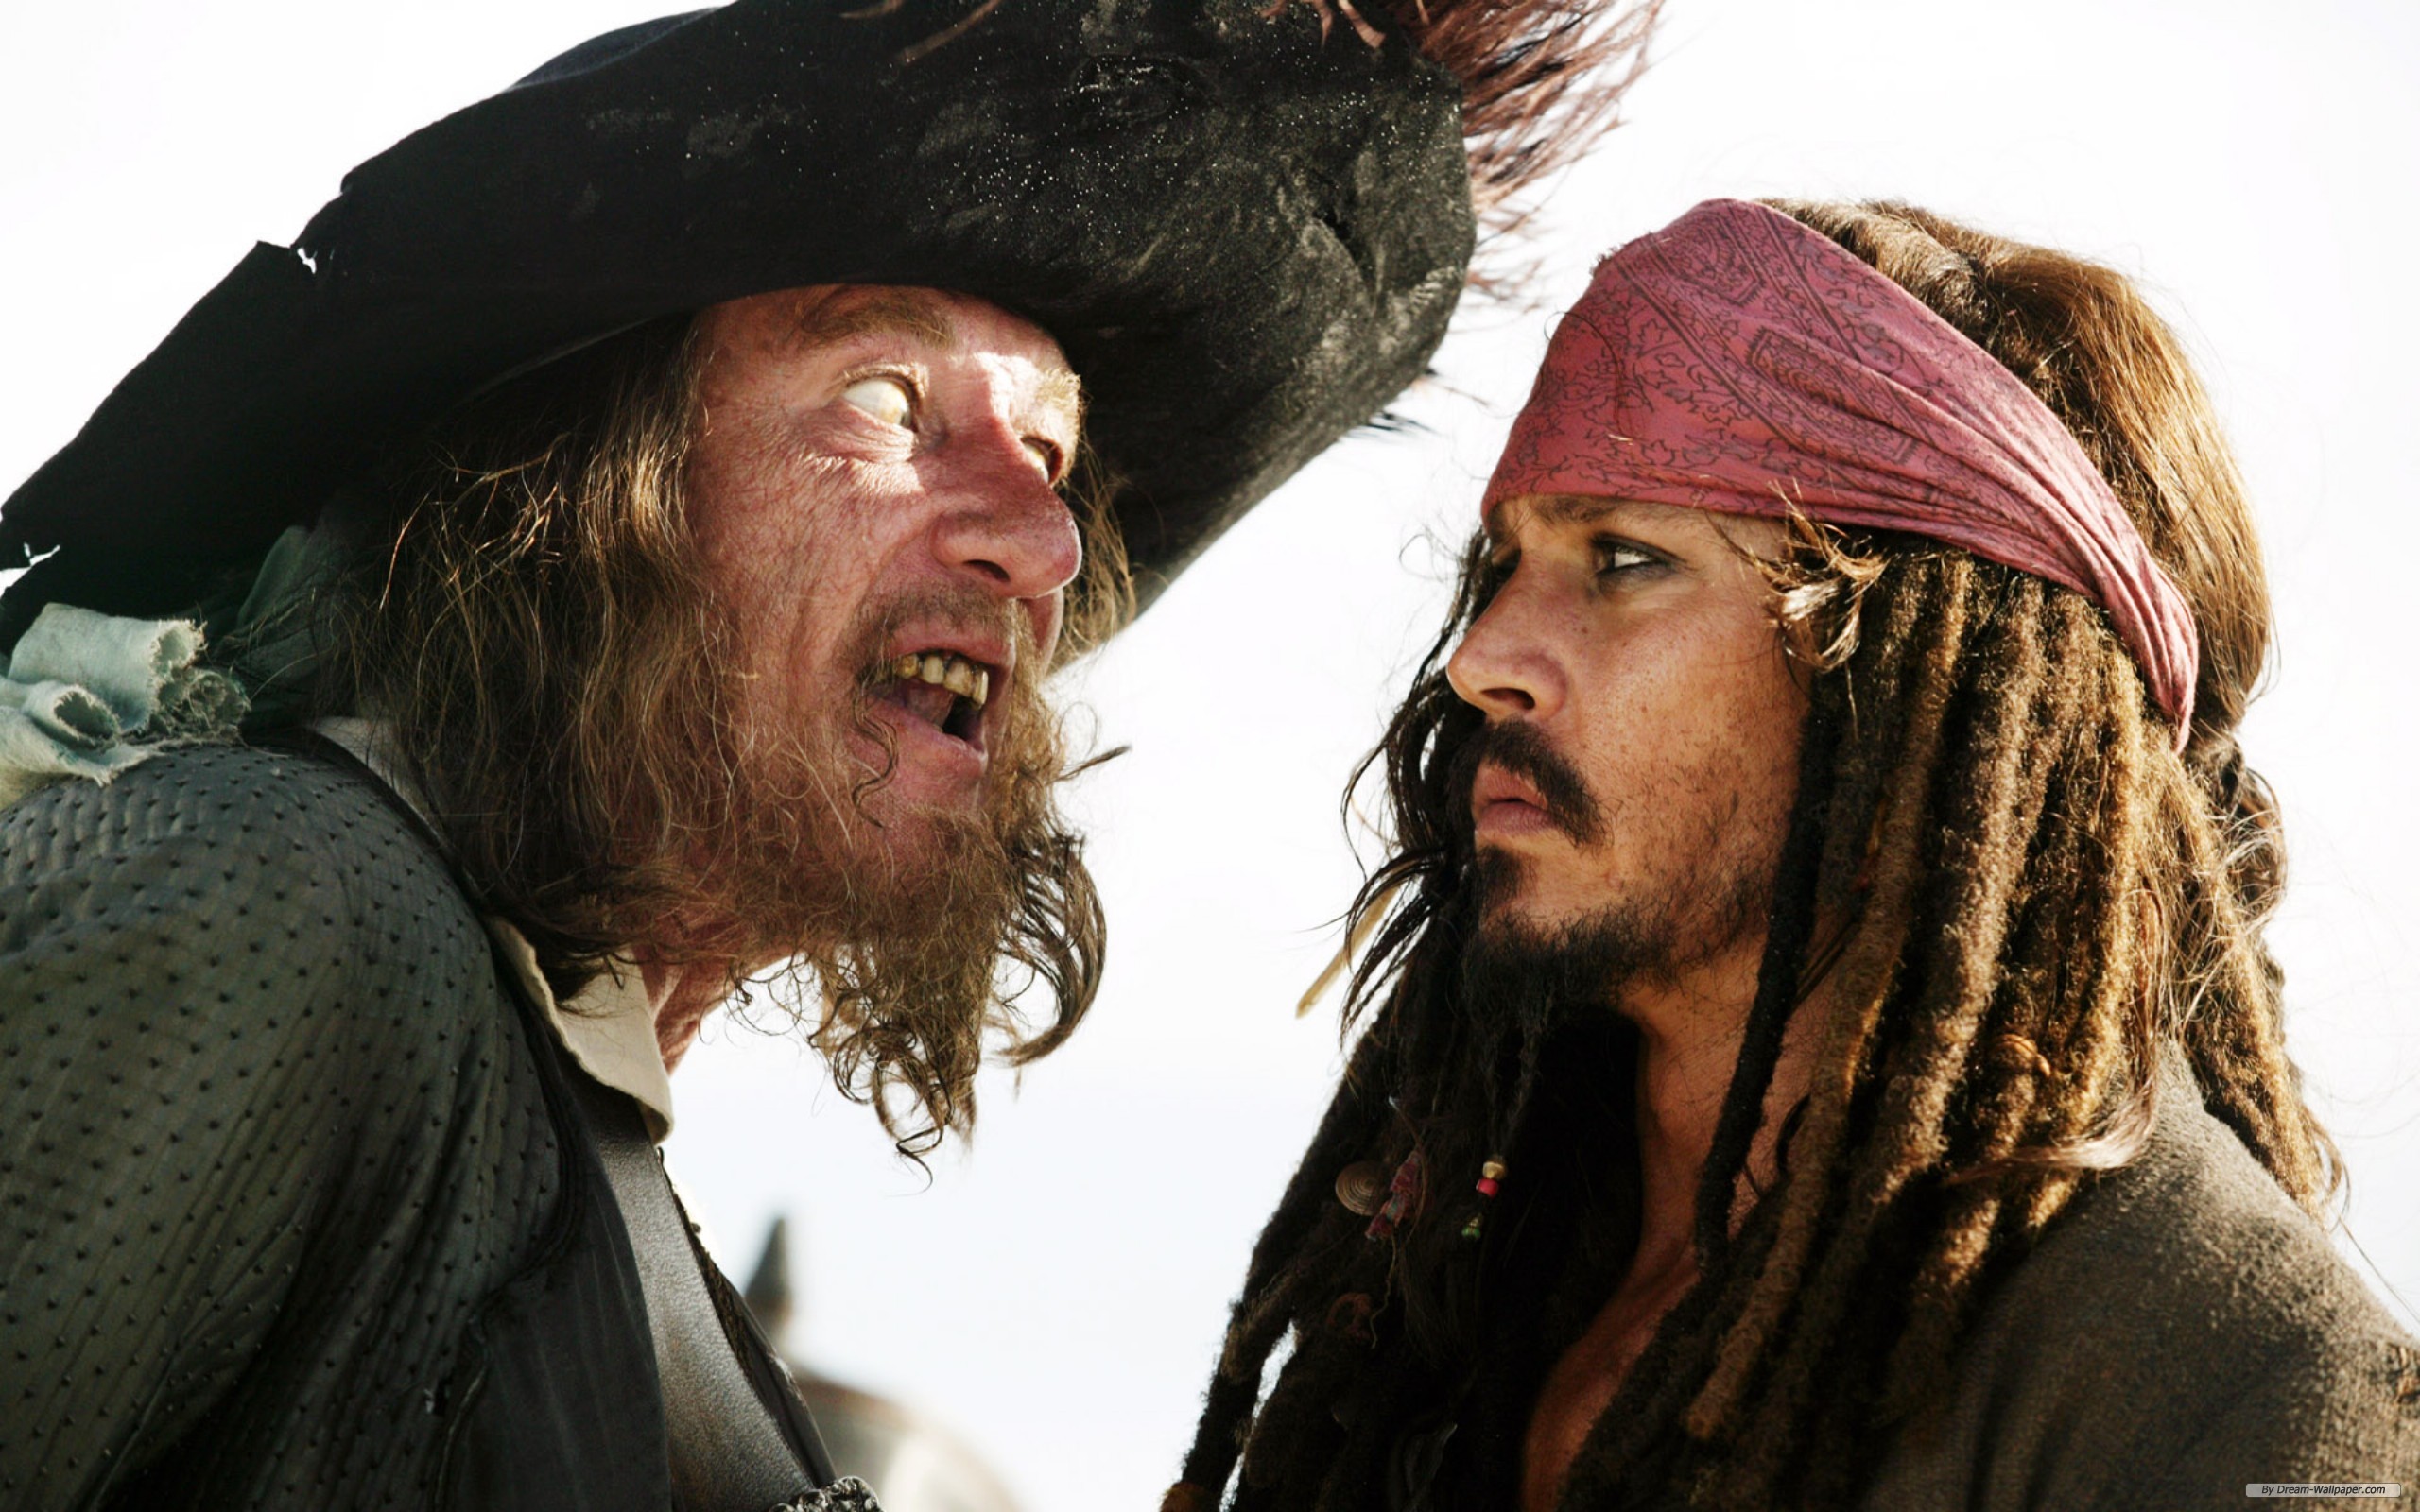 hector barbossa, movie, pirates of the caribbean: at world's end, geoffrey rush, jack sparrow, johnny depp, pirates of the caribbean QHD